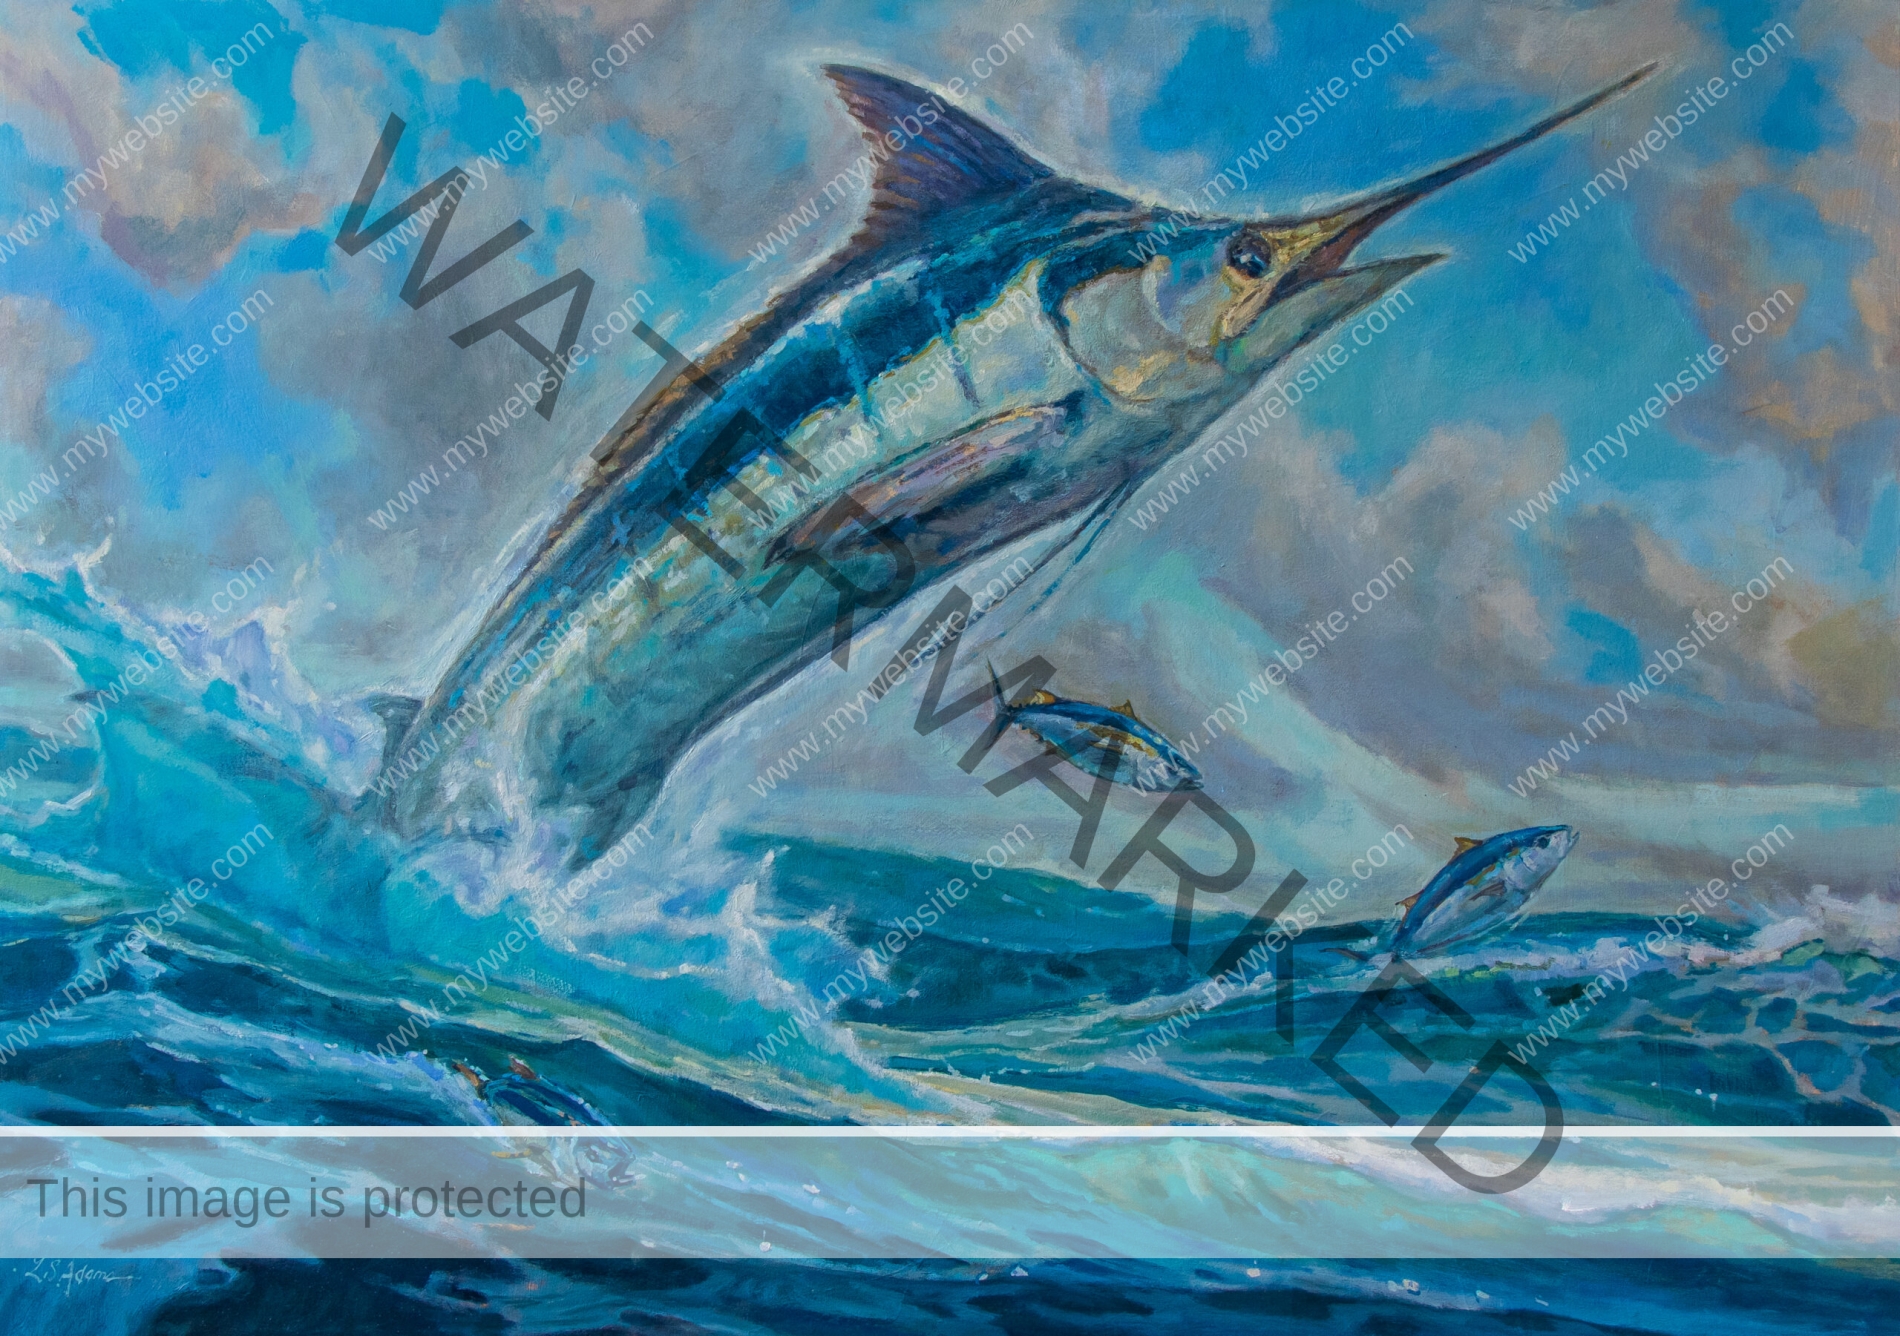 Marlin oil painting by Susan Adams. It depicts a marlin jumping from Costa Rica's oceans, evoking feelings of euphoria.